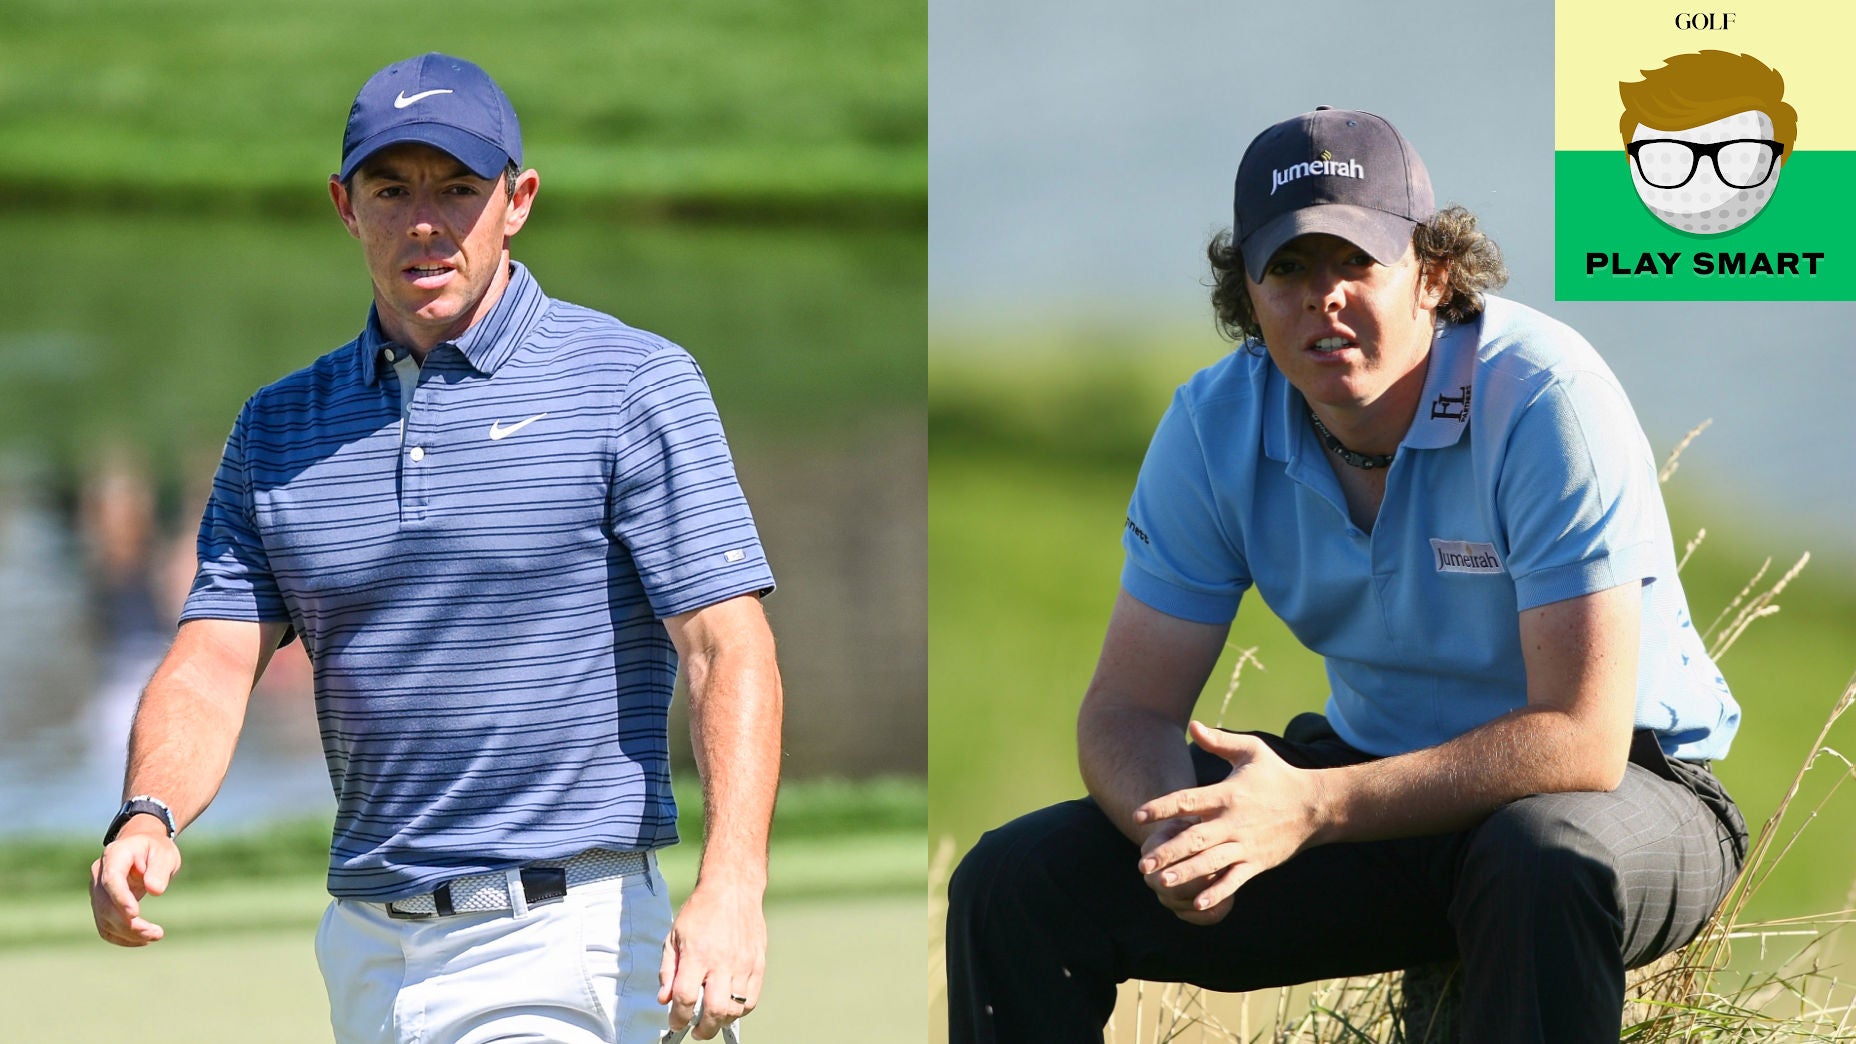 Rory McIlroy explains how he changed his diet to cut fat and build muscle